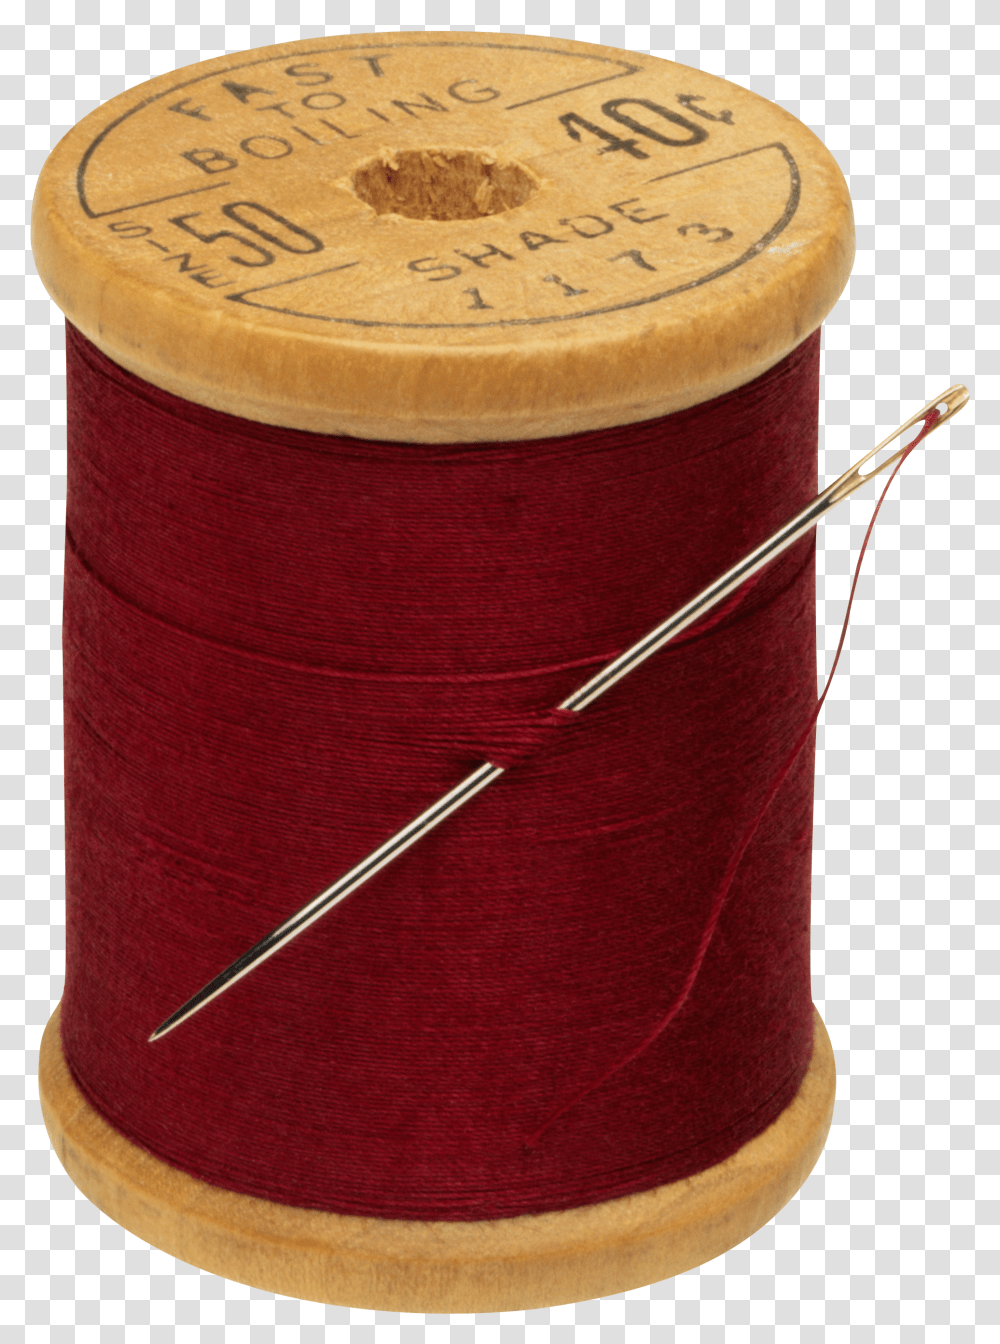 Thread And Needle Needle Spool Of Red Thread Transparent Png